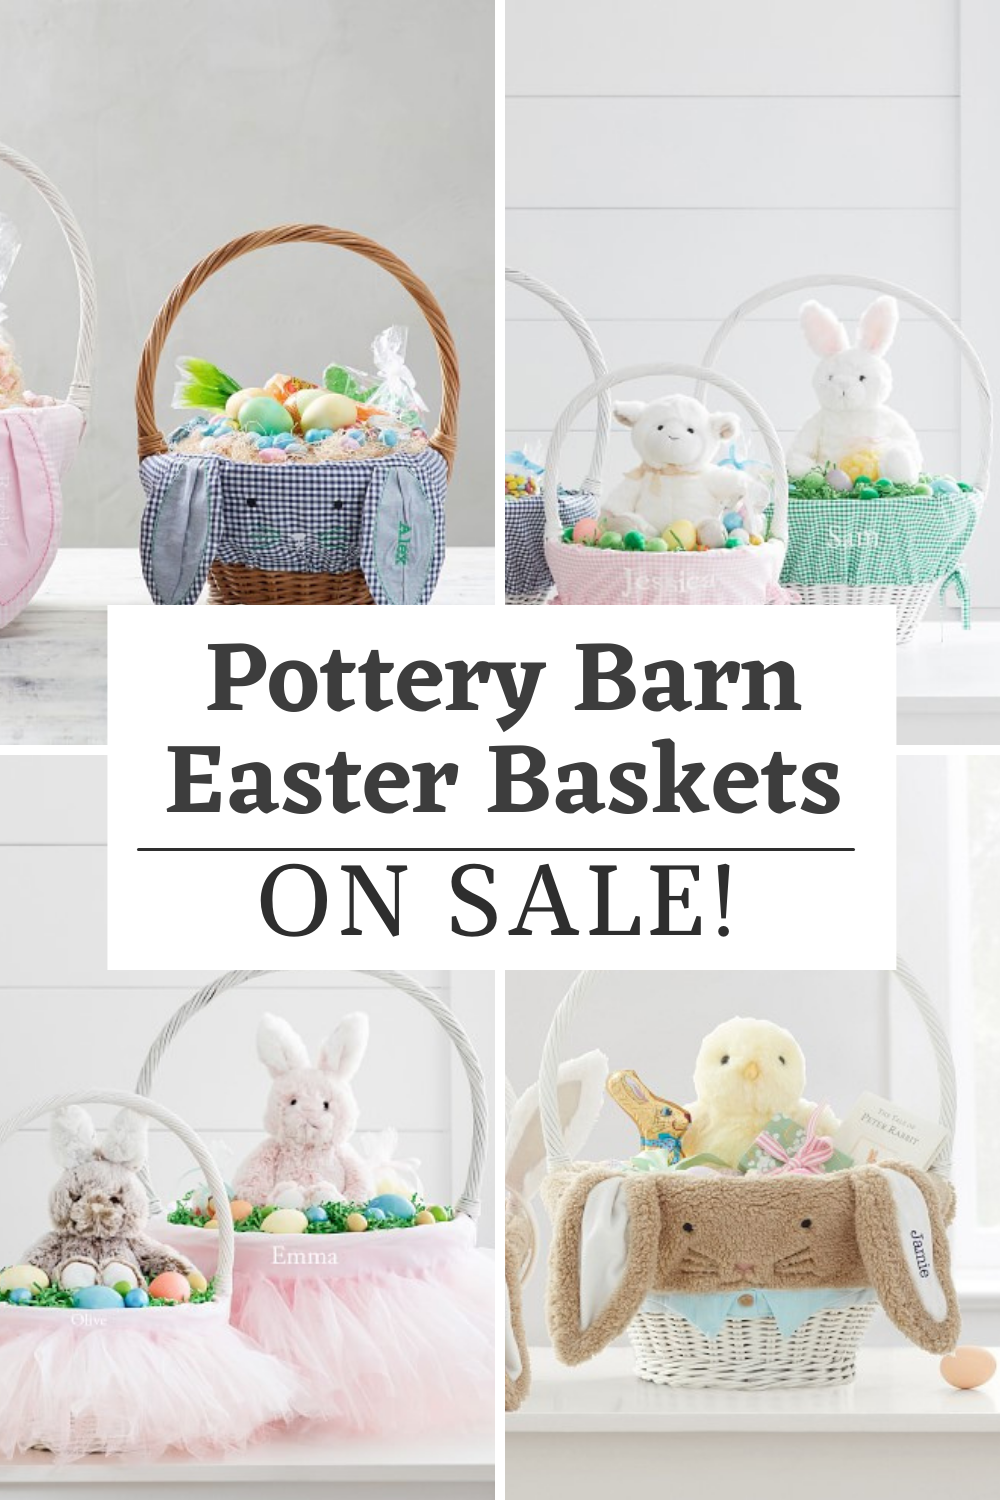 Pottery Barn Easter Baskets On Sale - So Many Cute Options! - Thrifty NW Mom